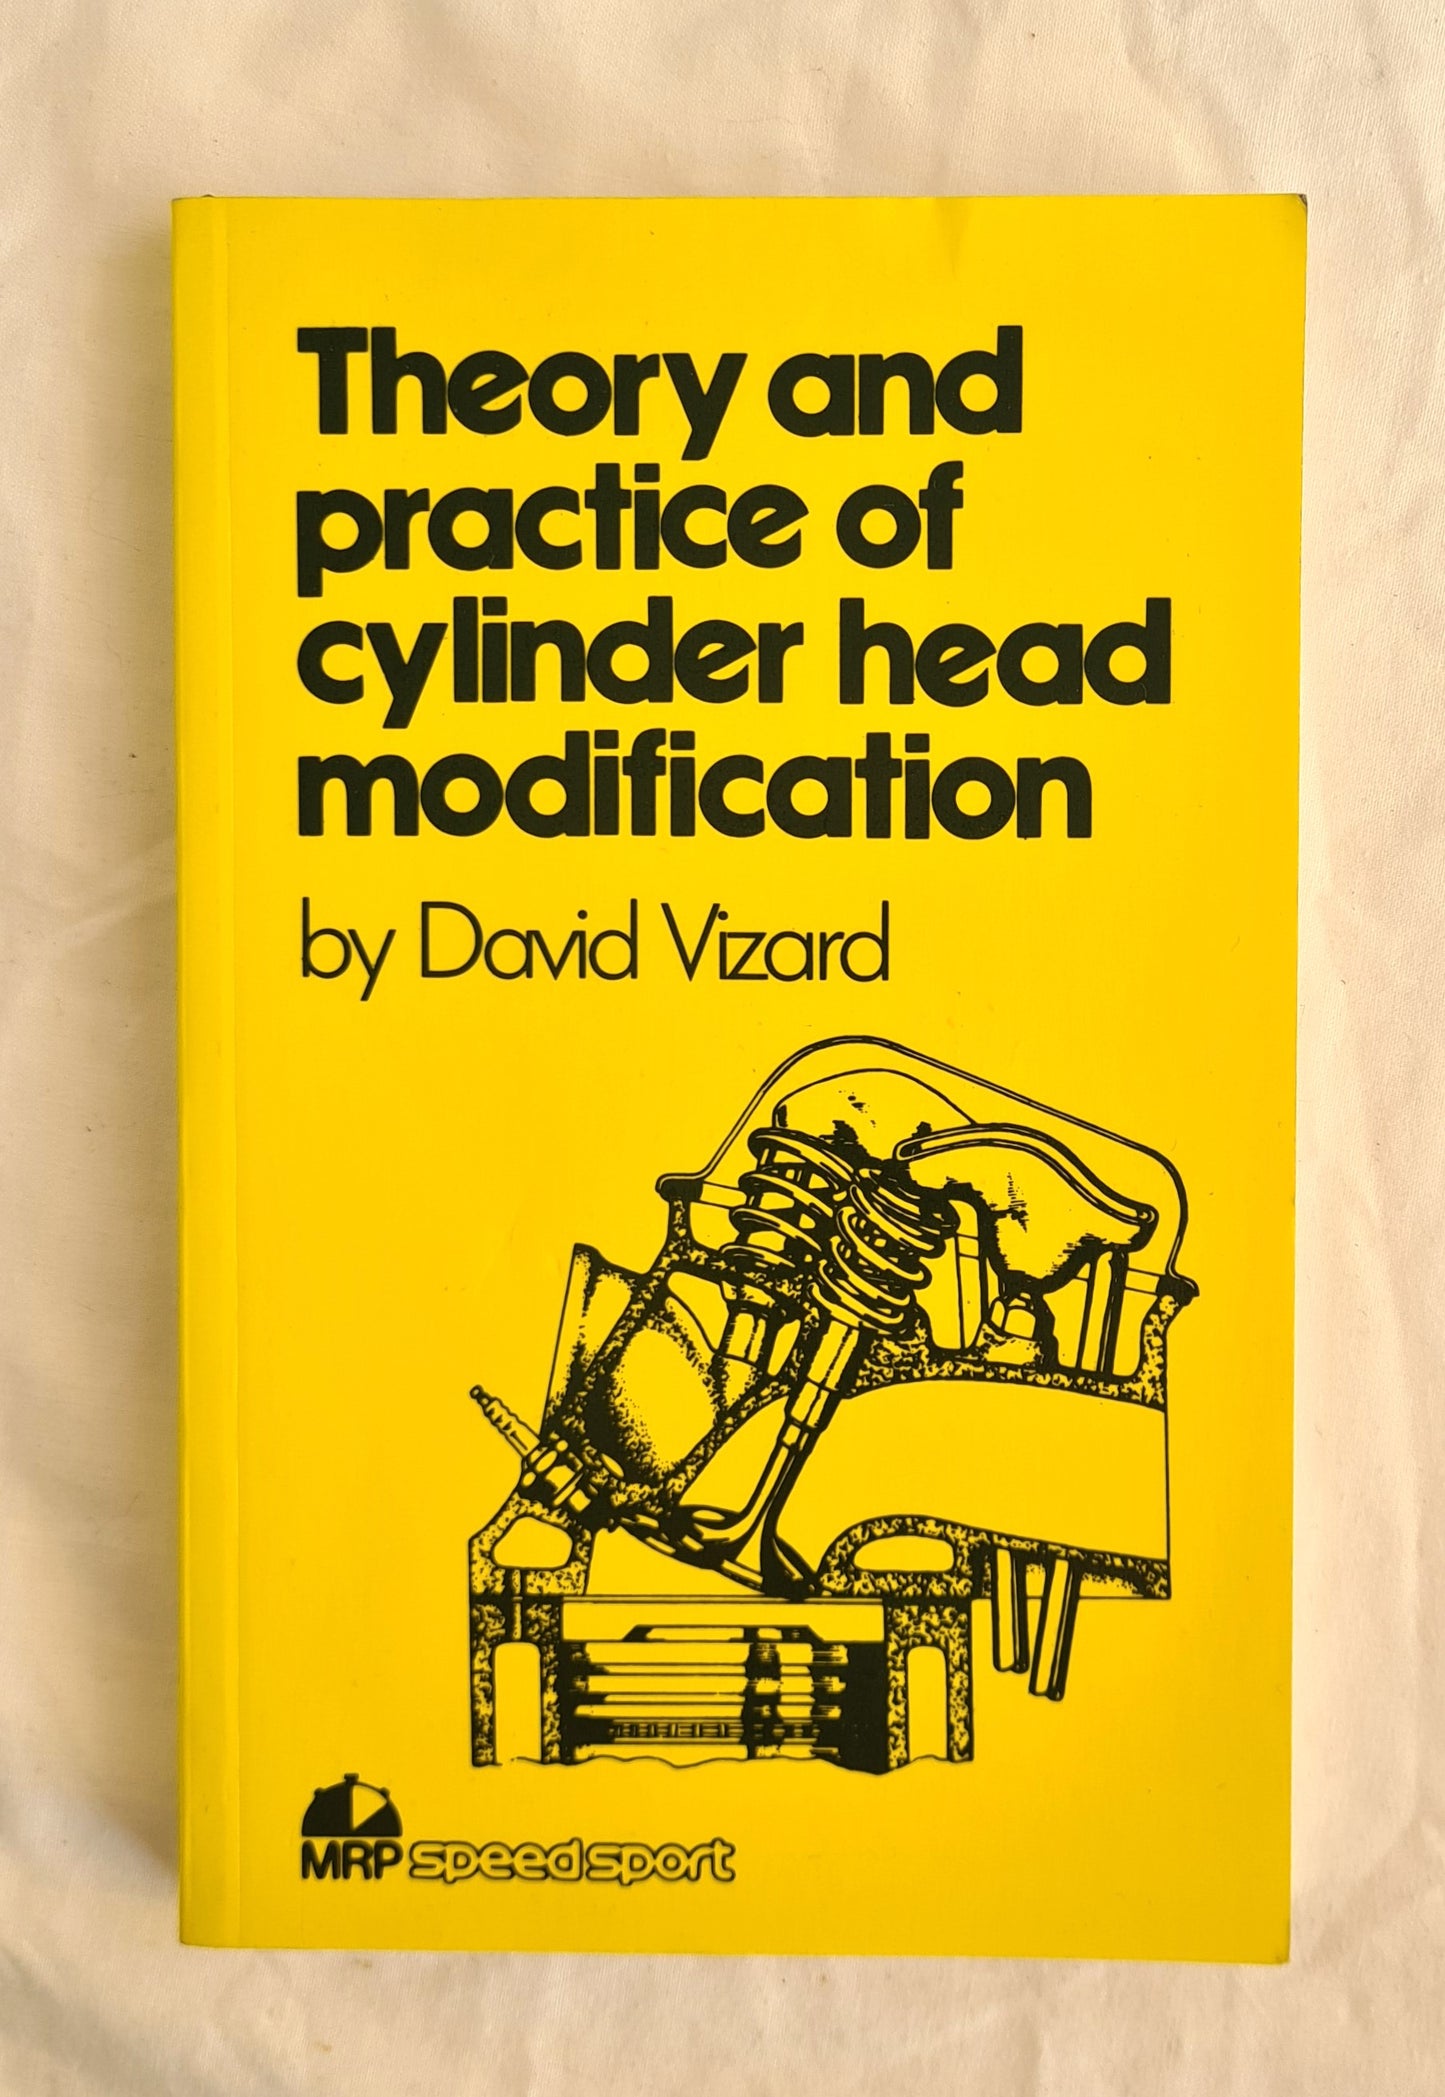 Theory and Practice of Cylinder Head Modification  by David Vizard